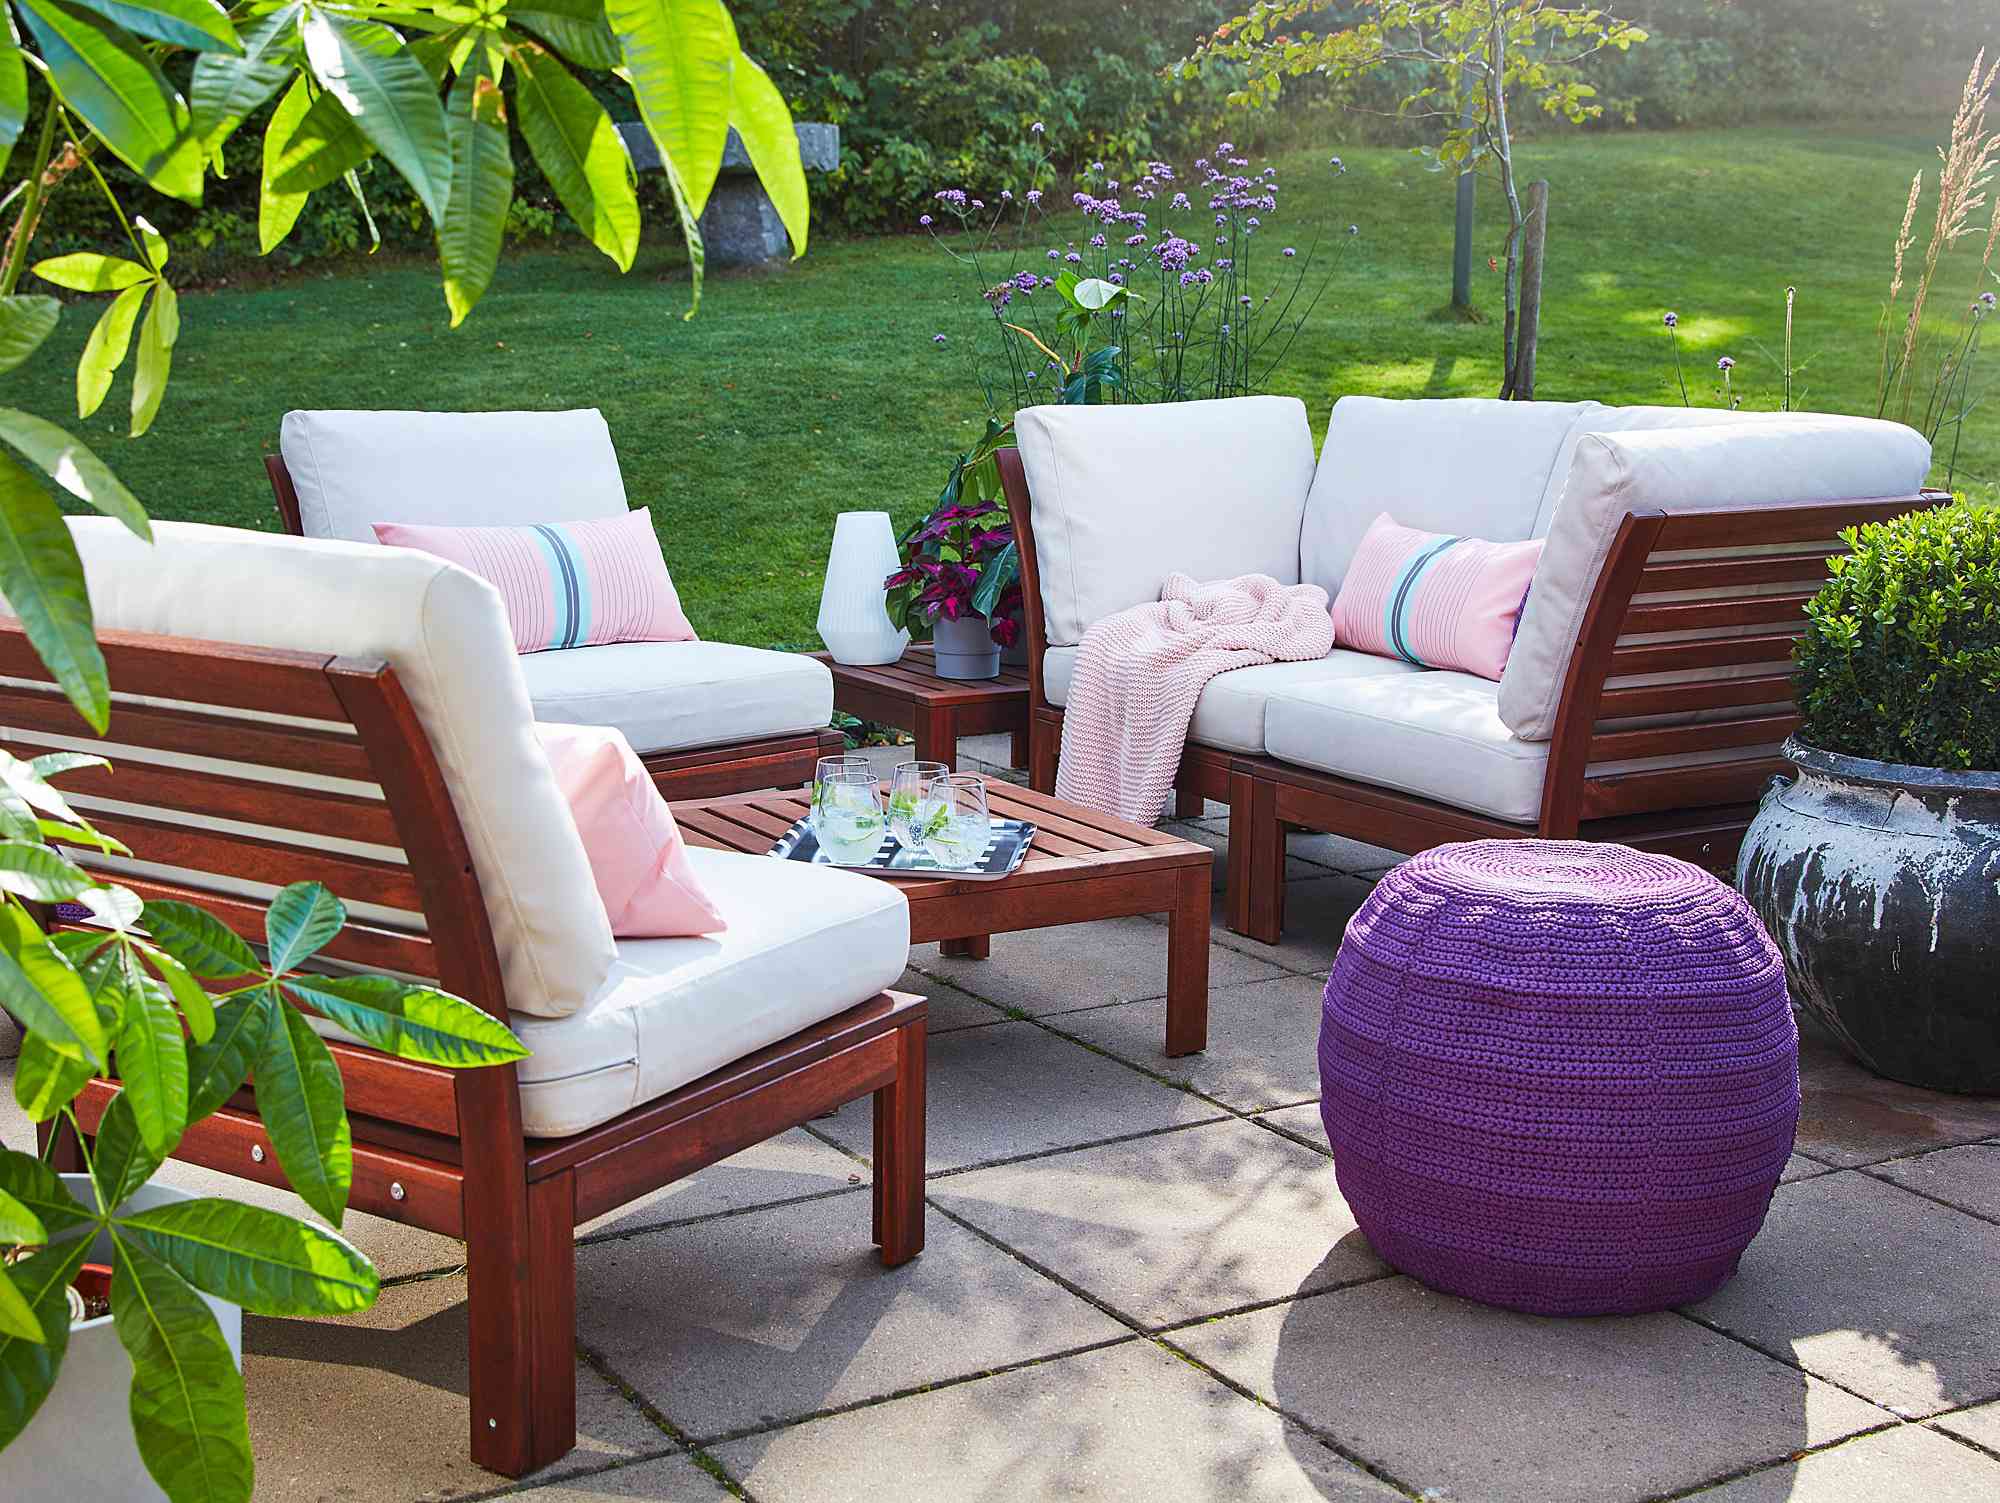 When Is The Best Time To Buy Patio Furniture On Sale